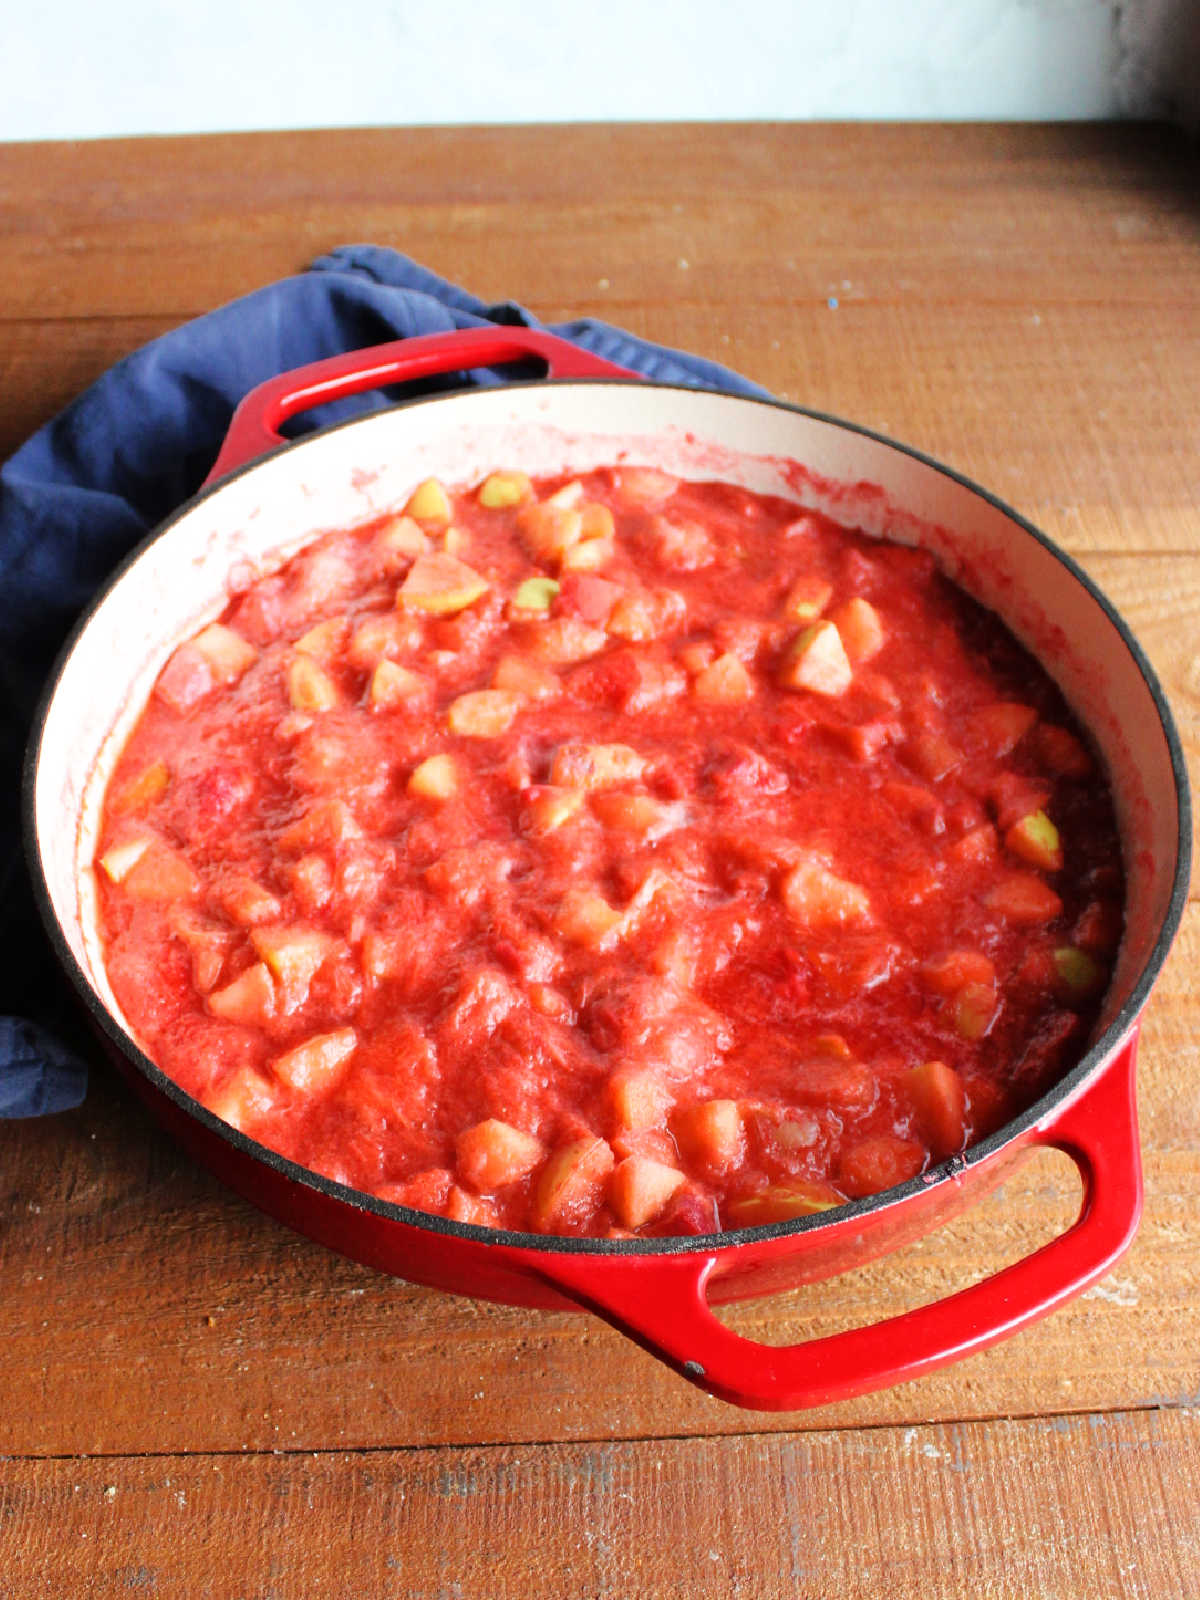 Pan of cooked fruit mixture showing softened apple chunks in mushy rhubarb and strawberry mixture.